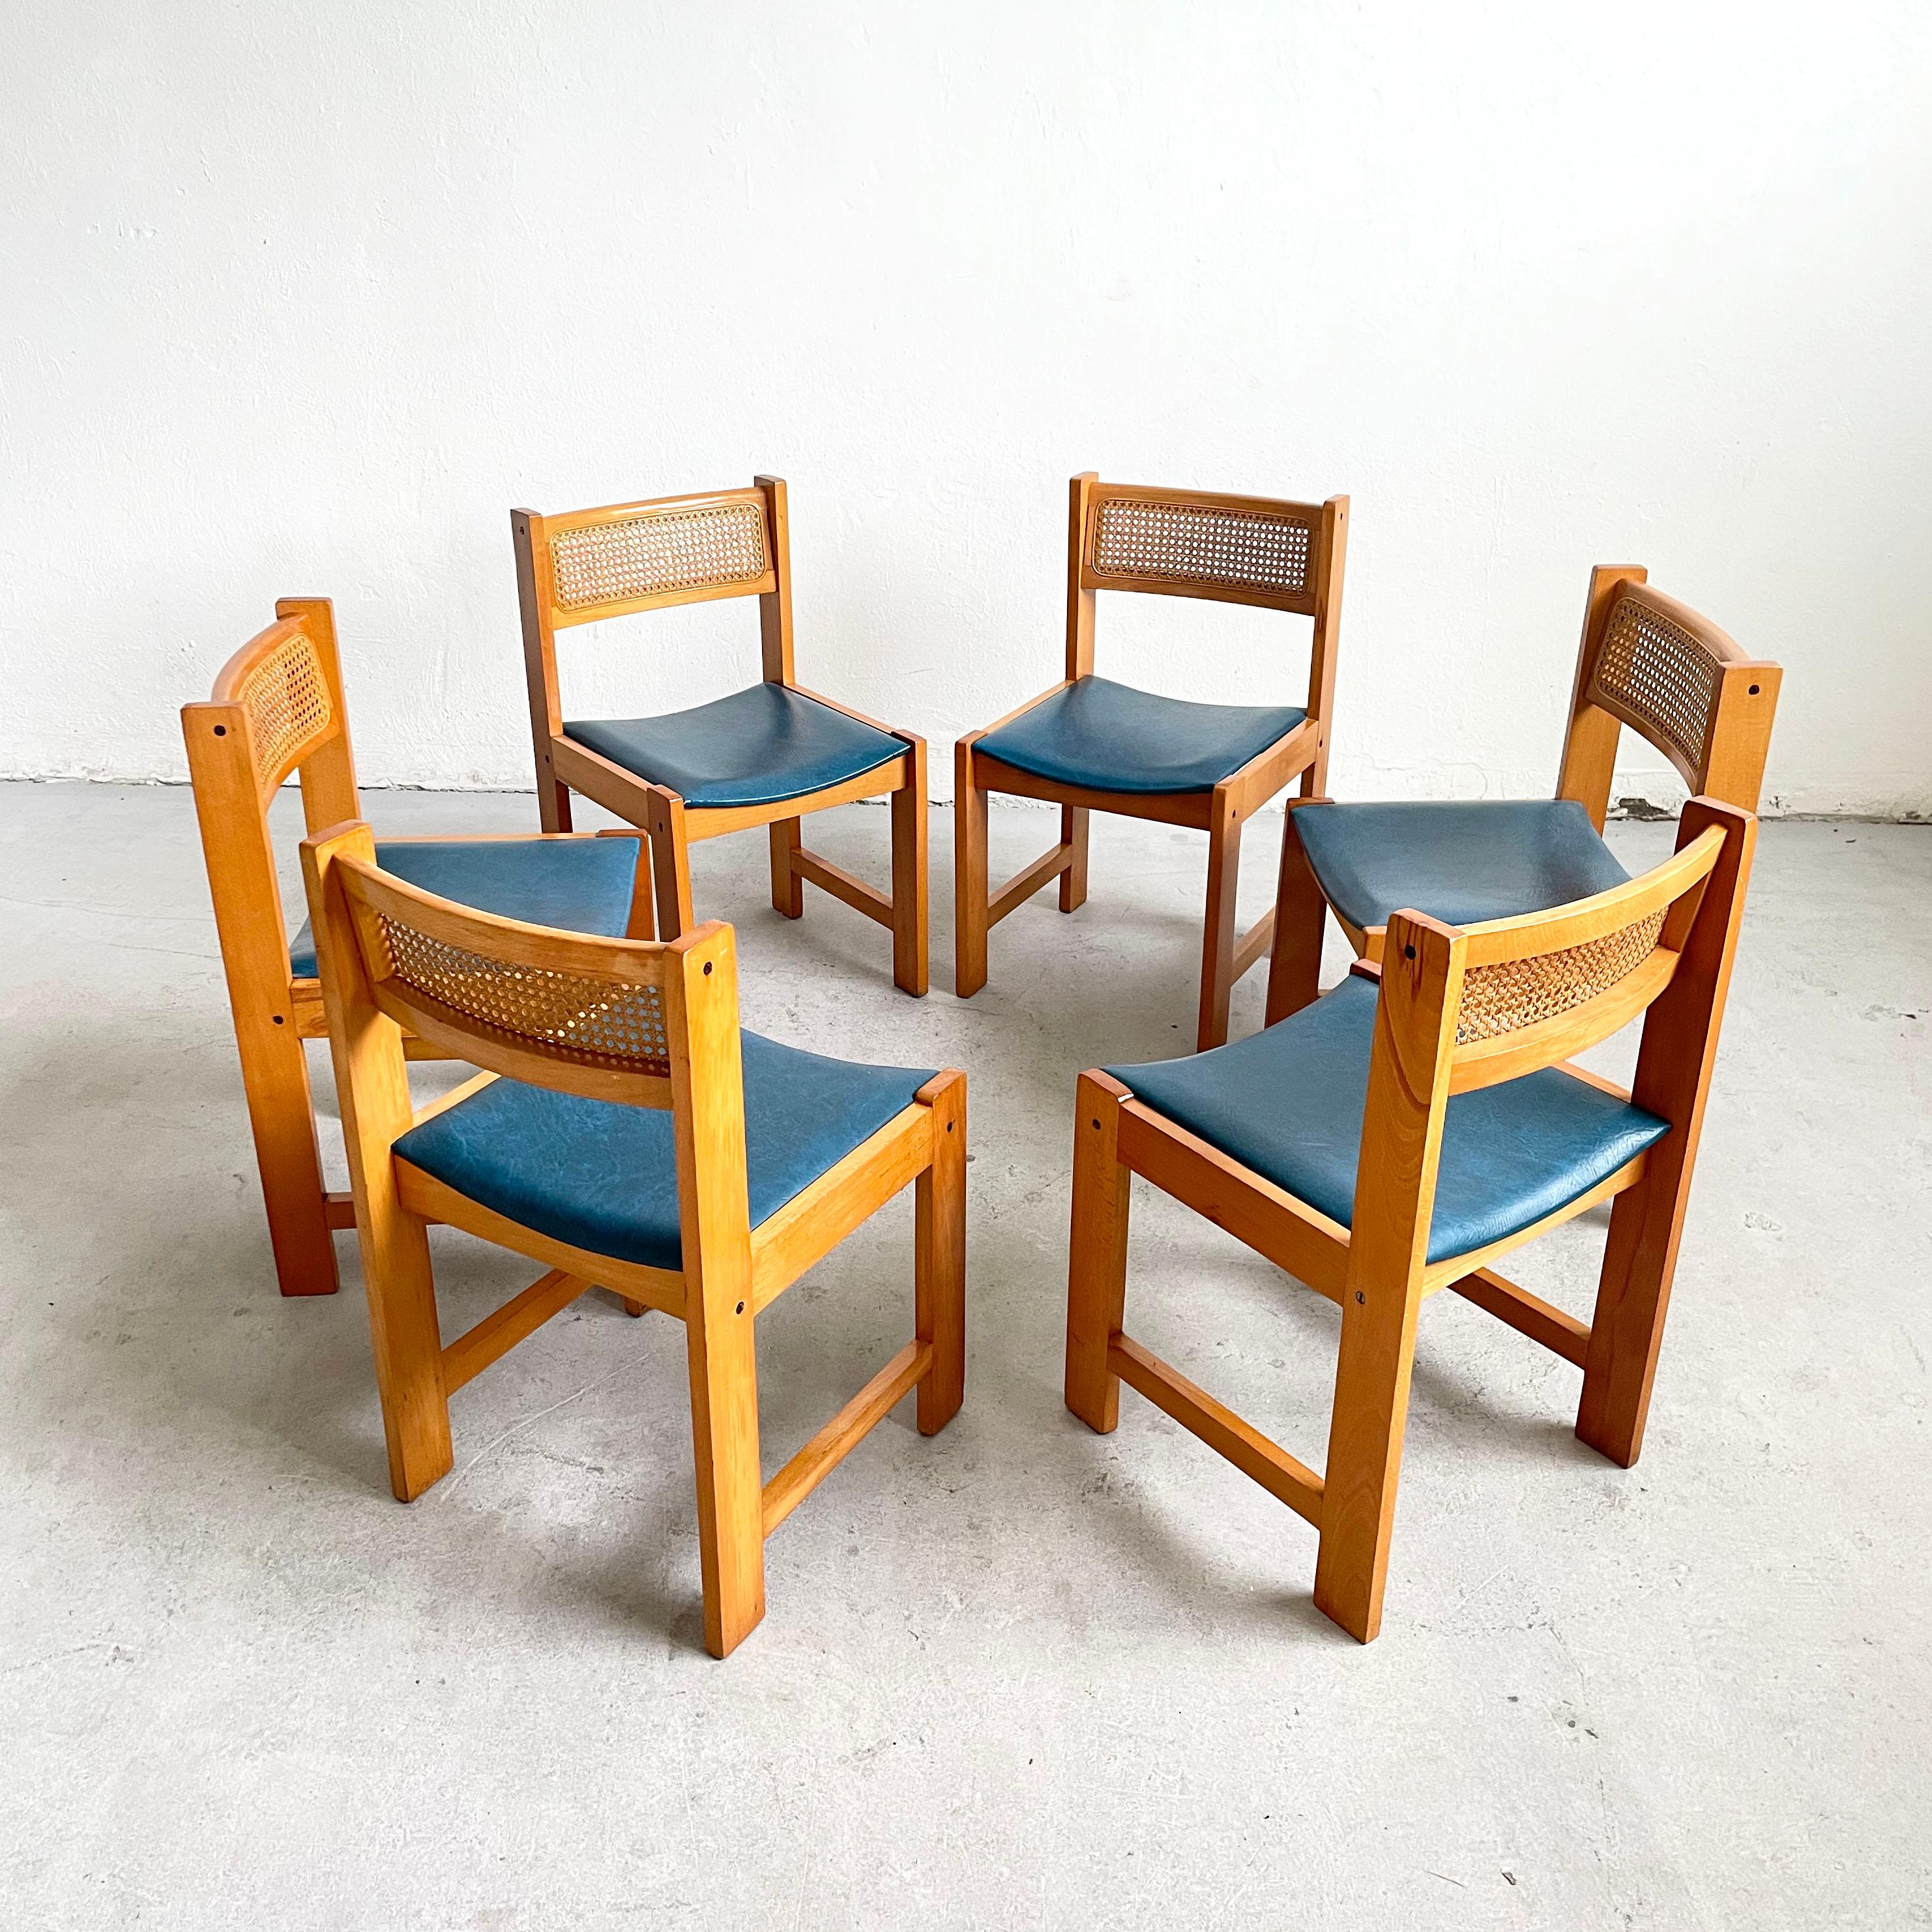 Mid-Century Modern Set of 6 Mid-Century Cane Rattan and Vinyl Wooden Dining Chairs, 1960s 1970s